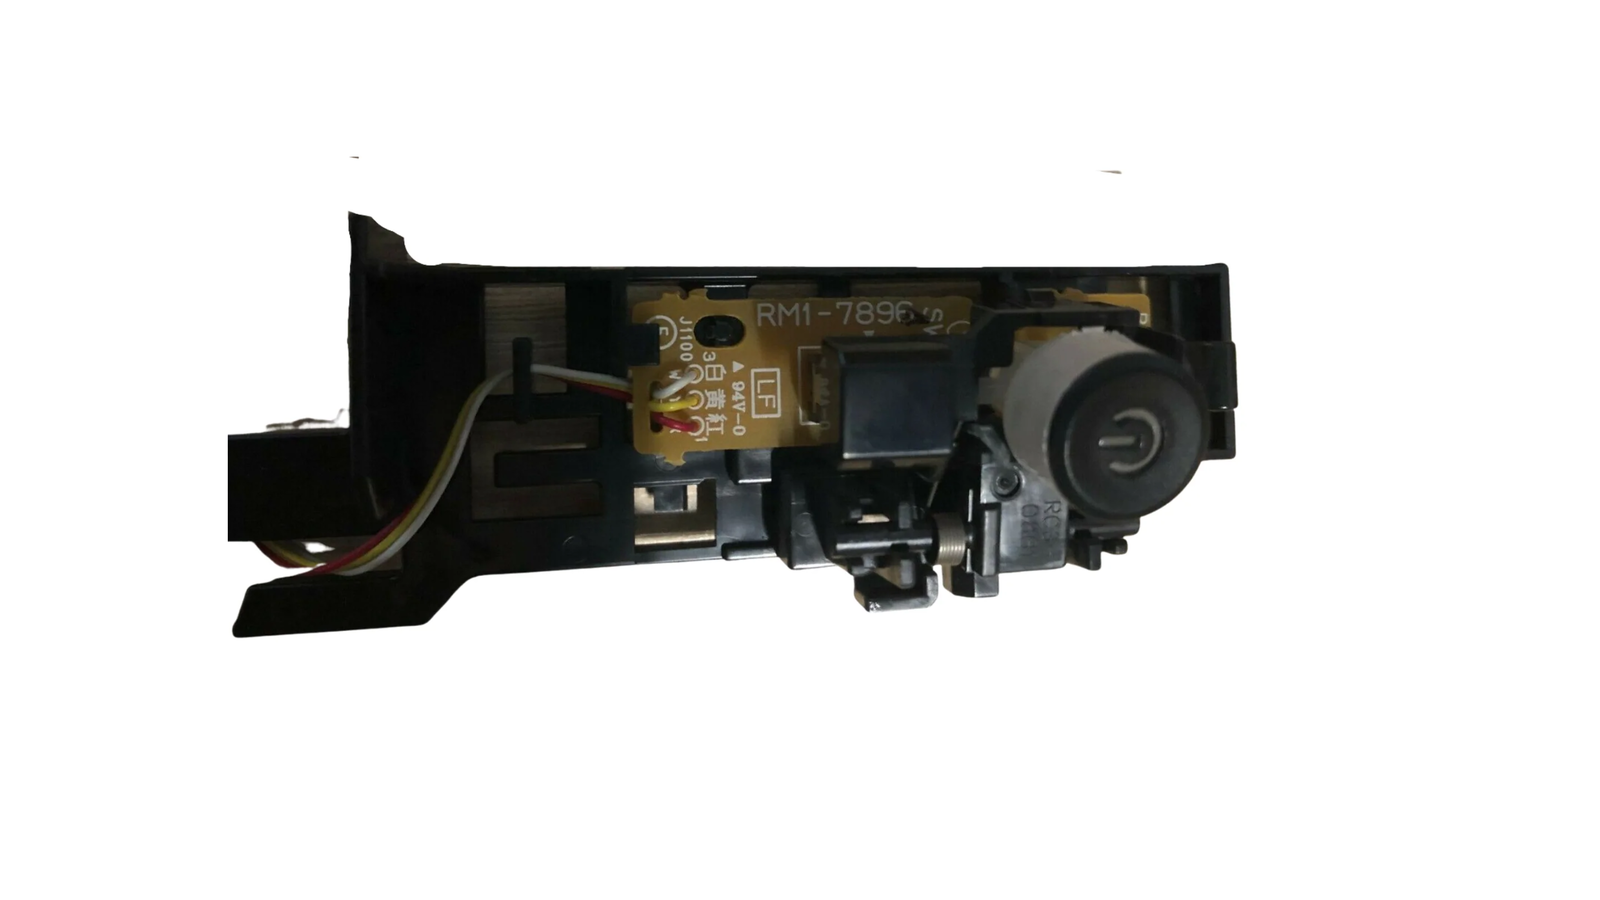 RM1-7896 power button board from HP Laser Jet M1132 MFP